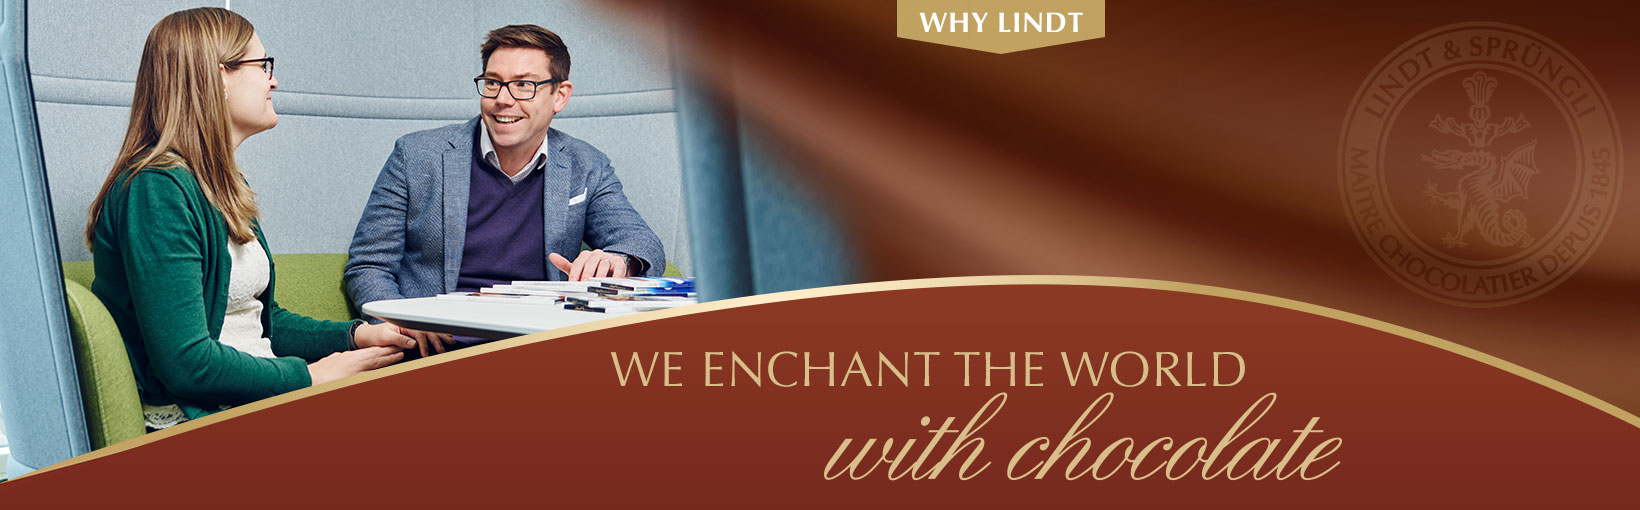 Why Lindt? …Because here I make a difference and that’s sweet. Matthew, Branch Manager